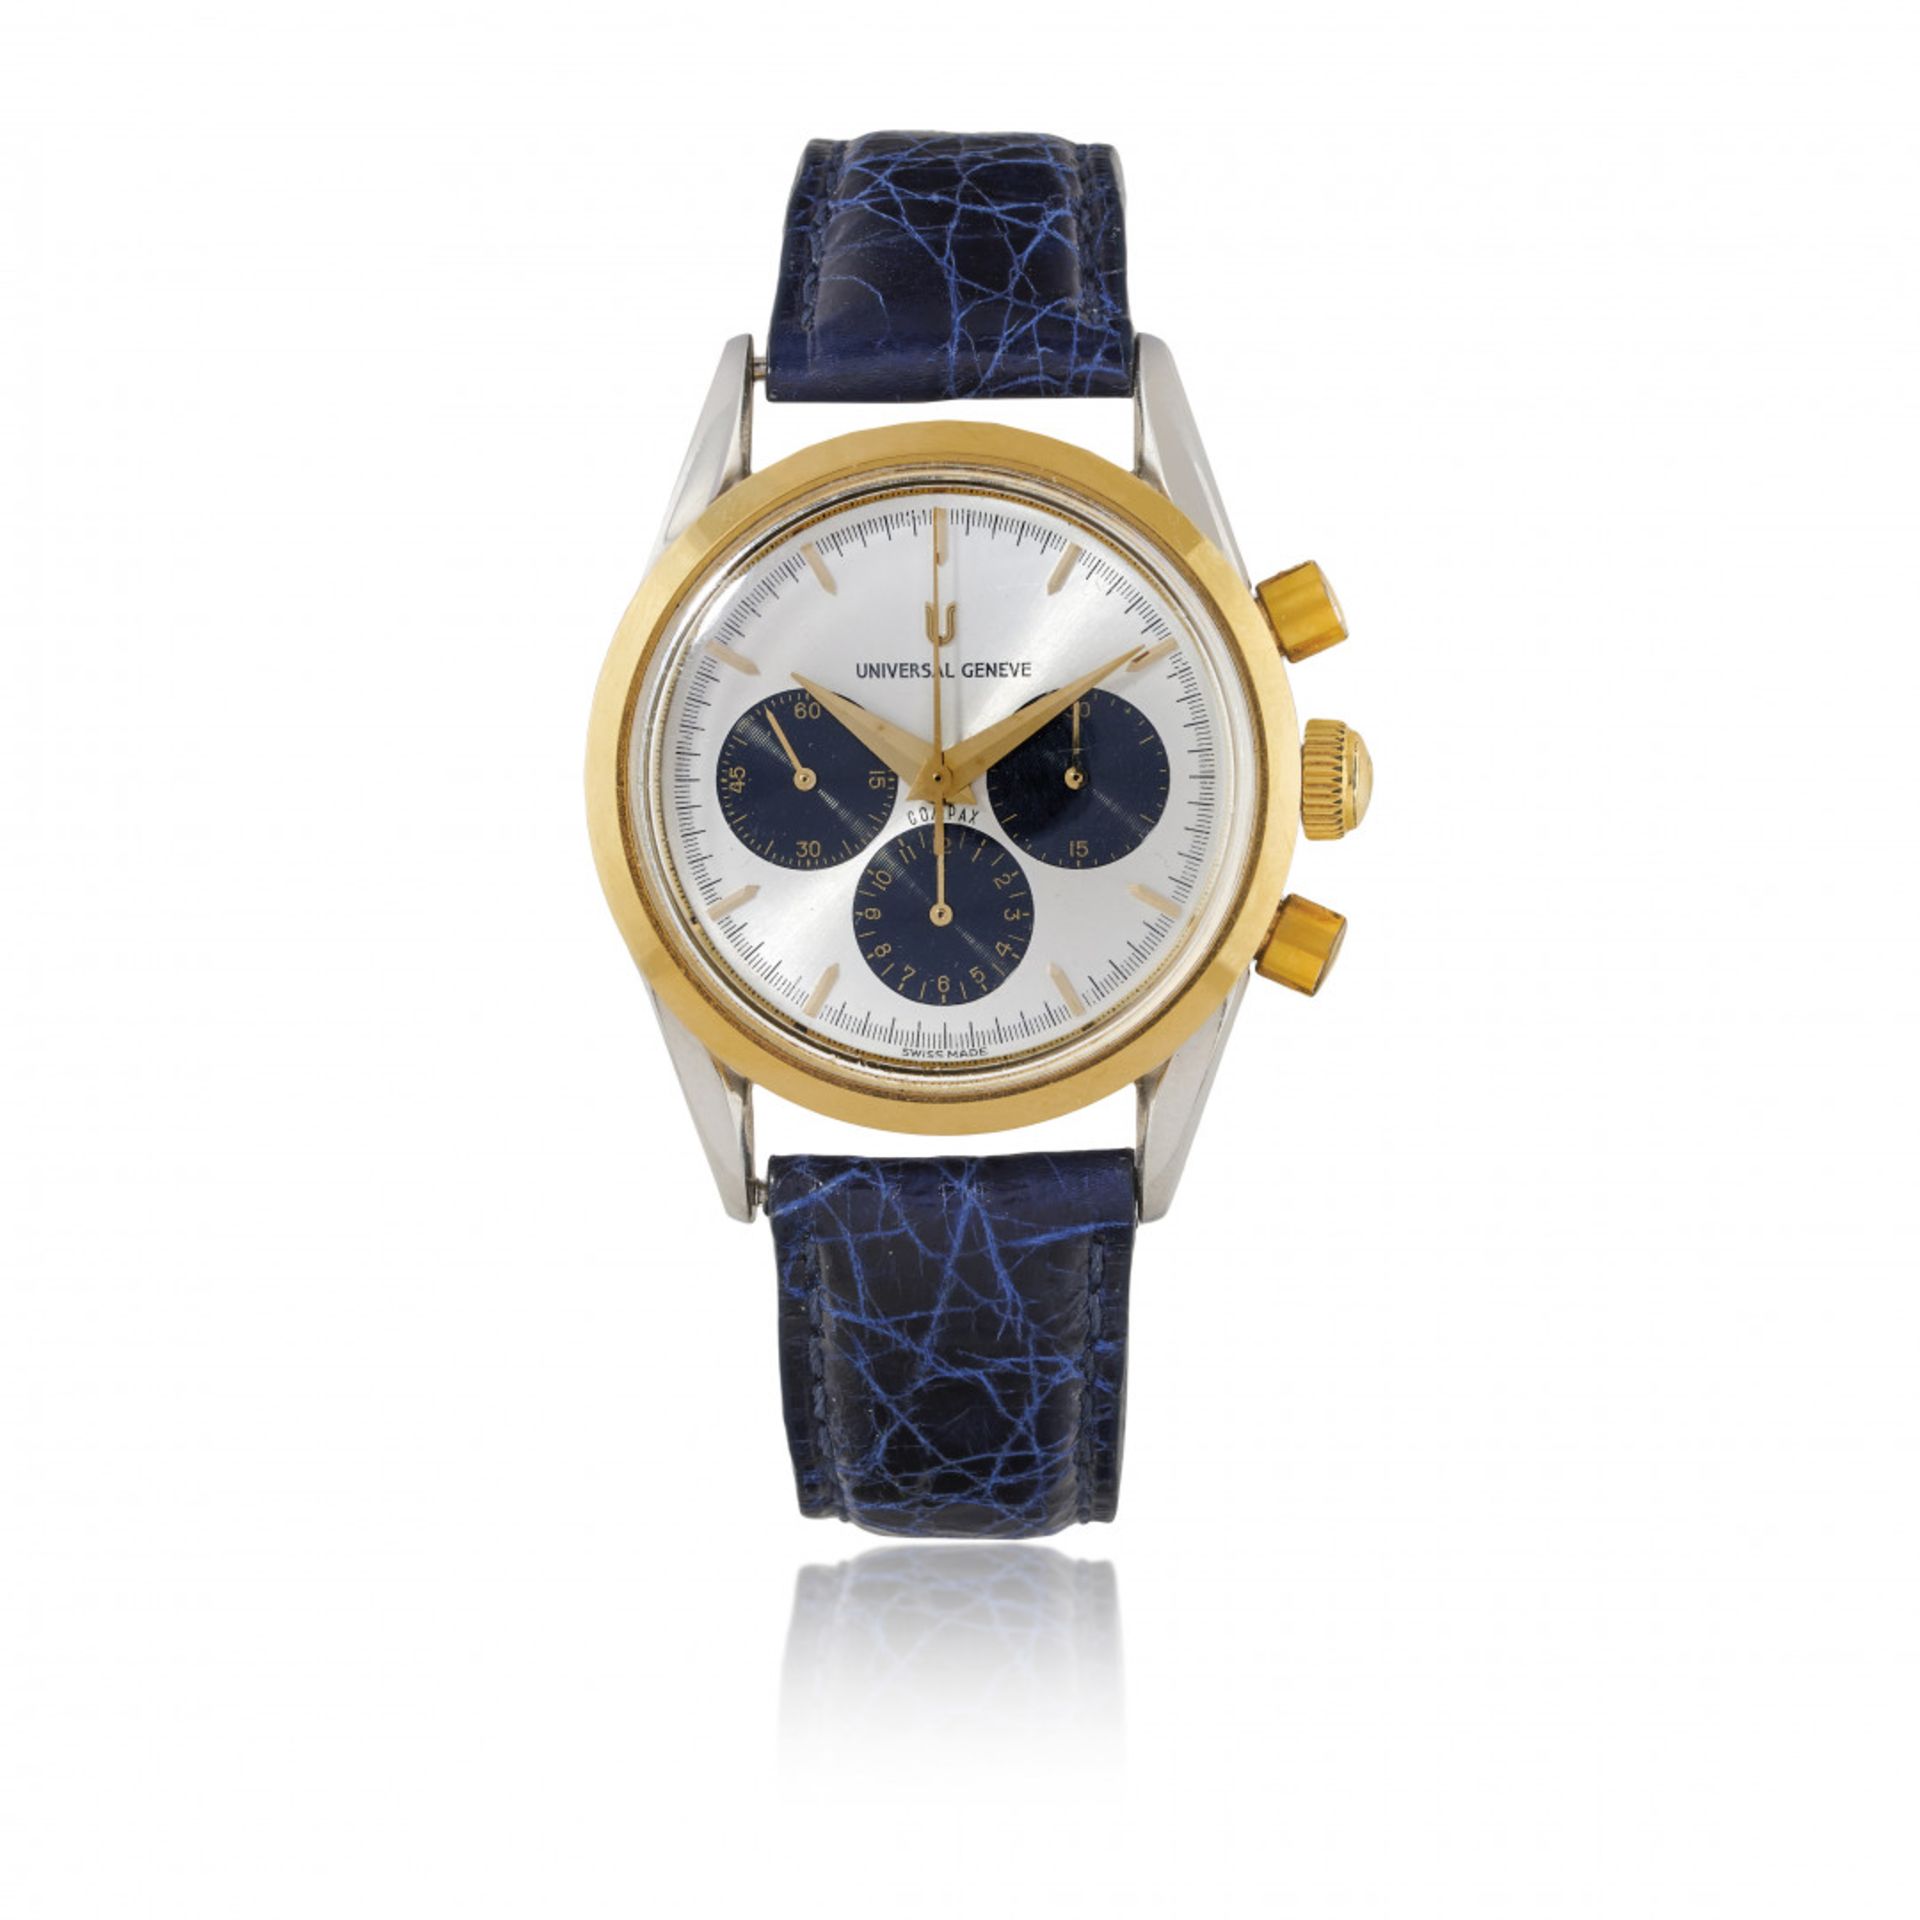 UNIVERSAL GENÈVE COMPAX REF. 284.465 STEEL AND GOLD, 90s